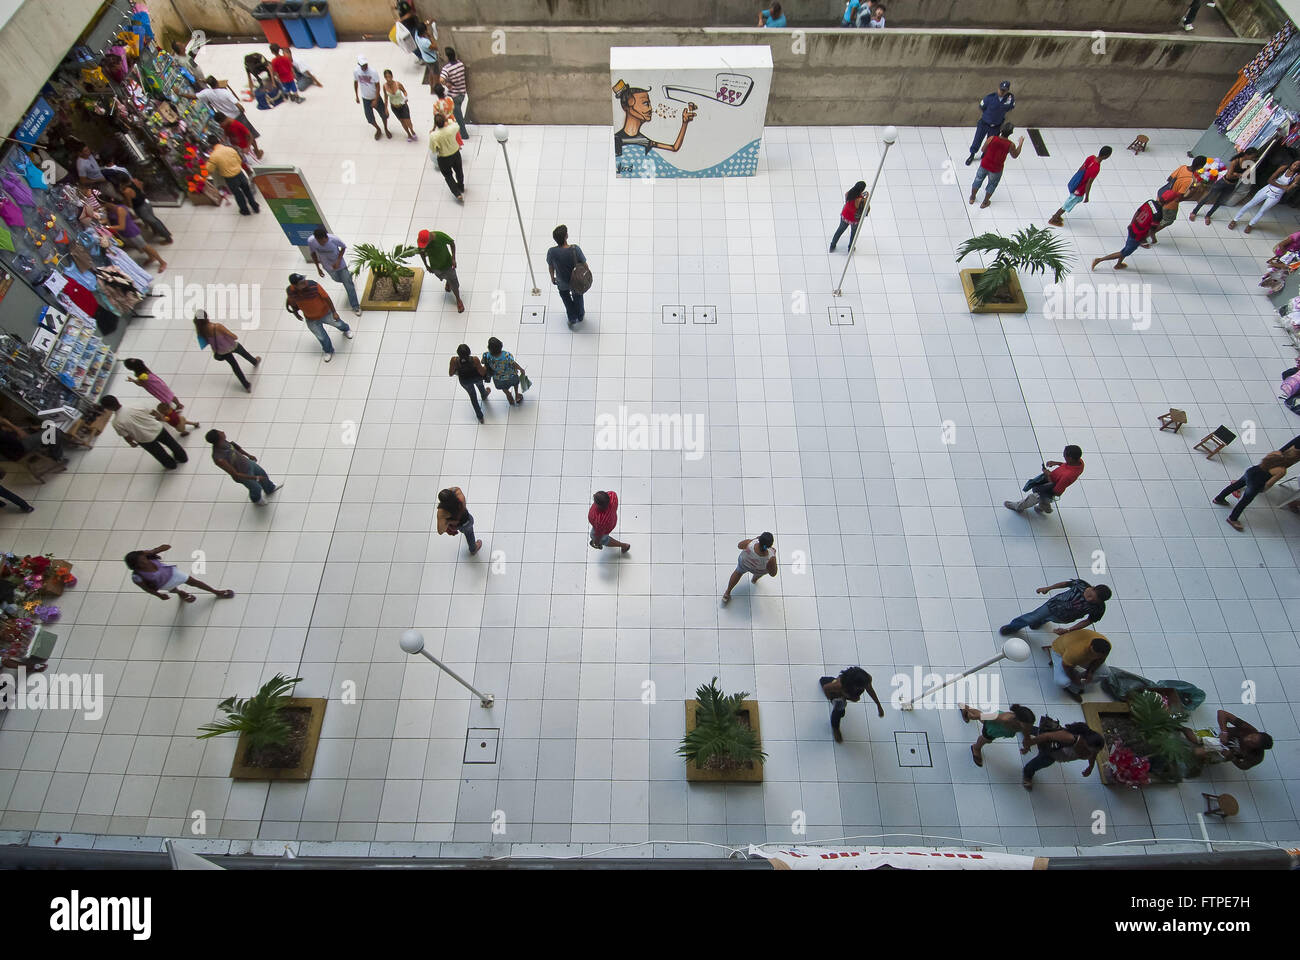 Consumers in the open area shopping popular trade of Teresina Stock Photo